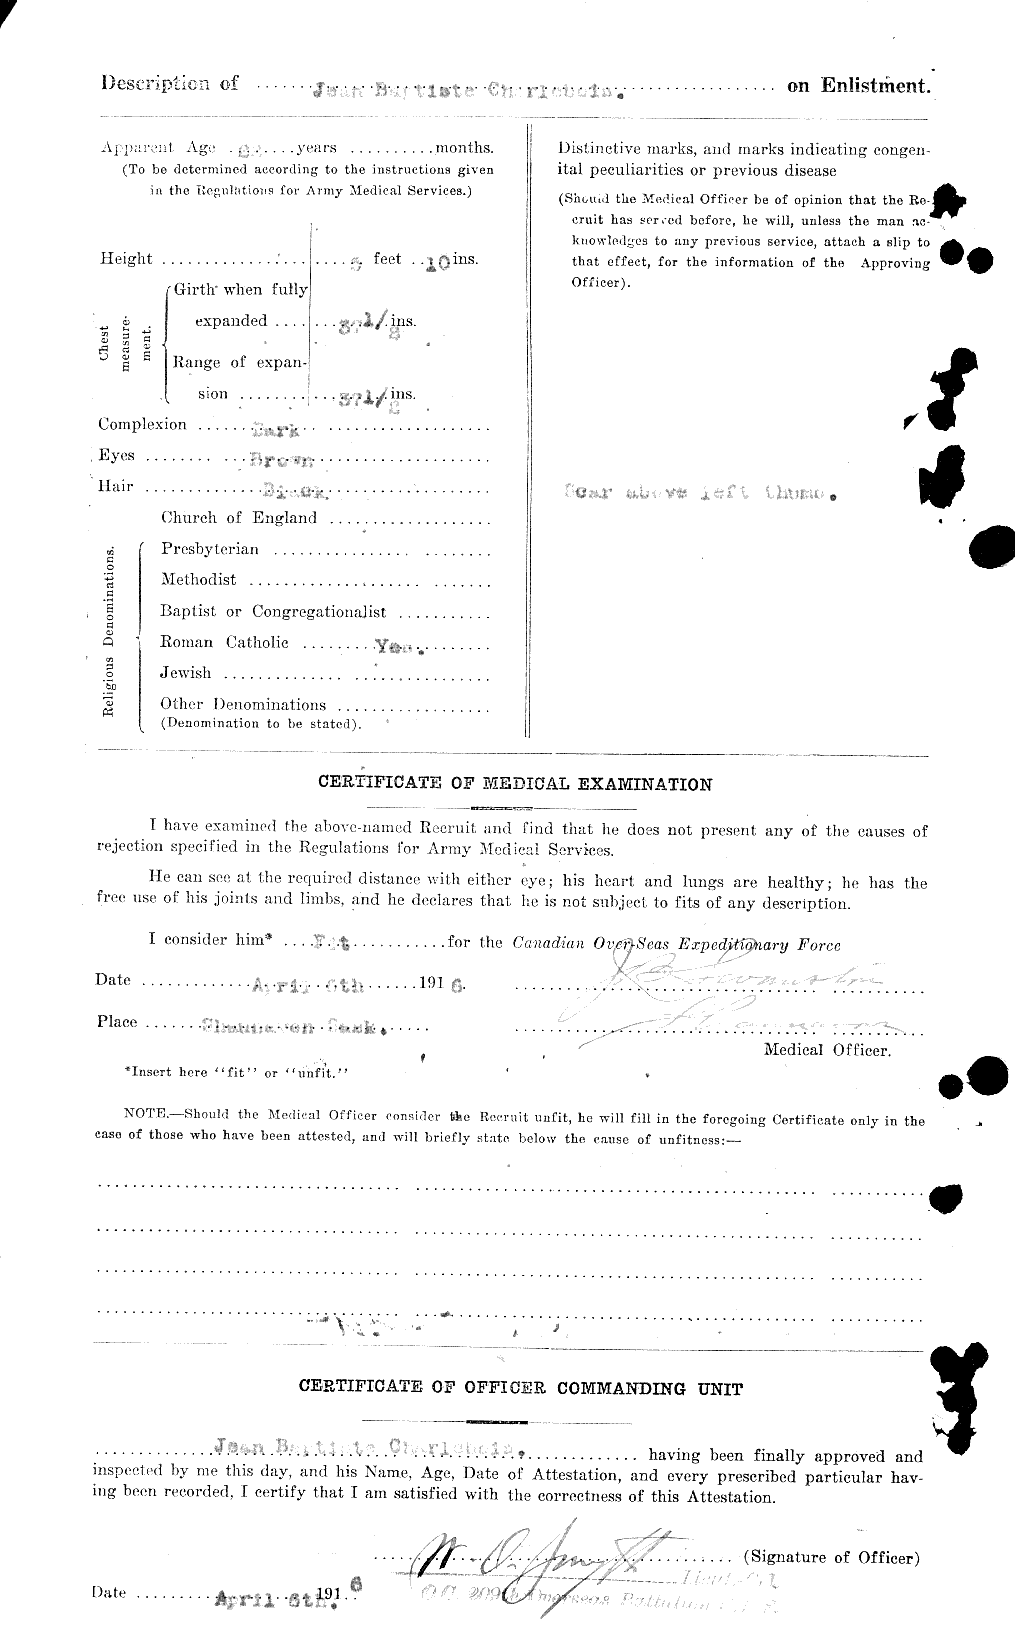 Personnel Records of the First World War - CEF 015619b